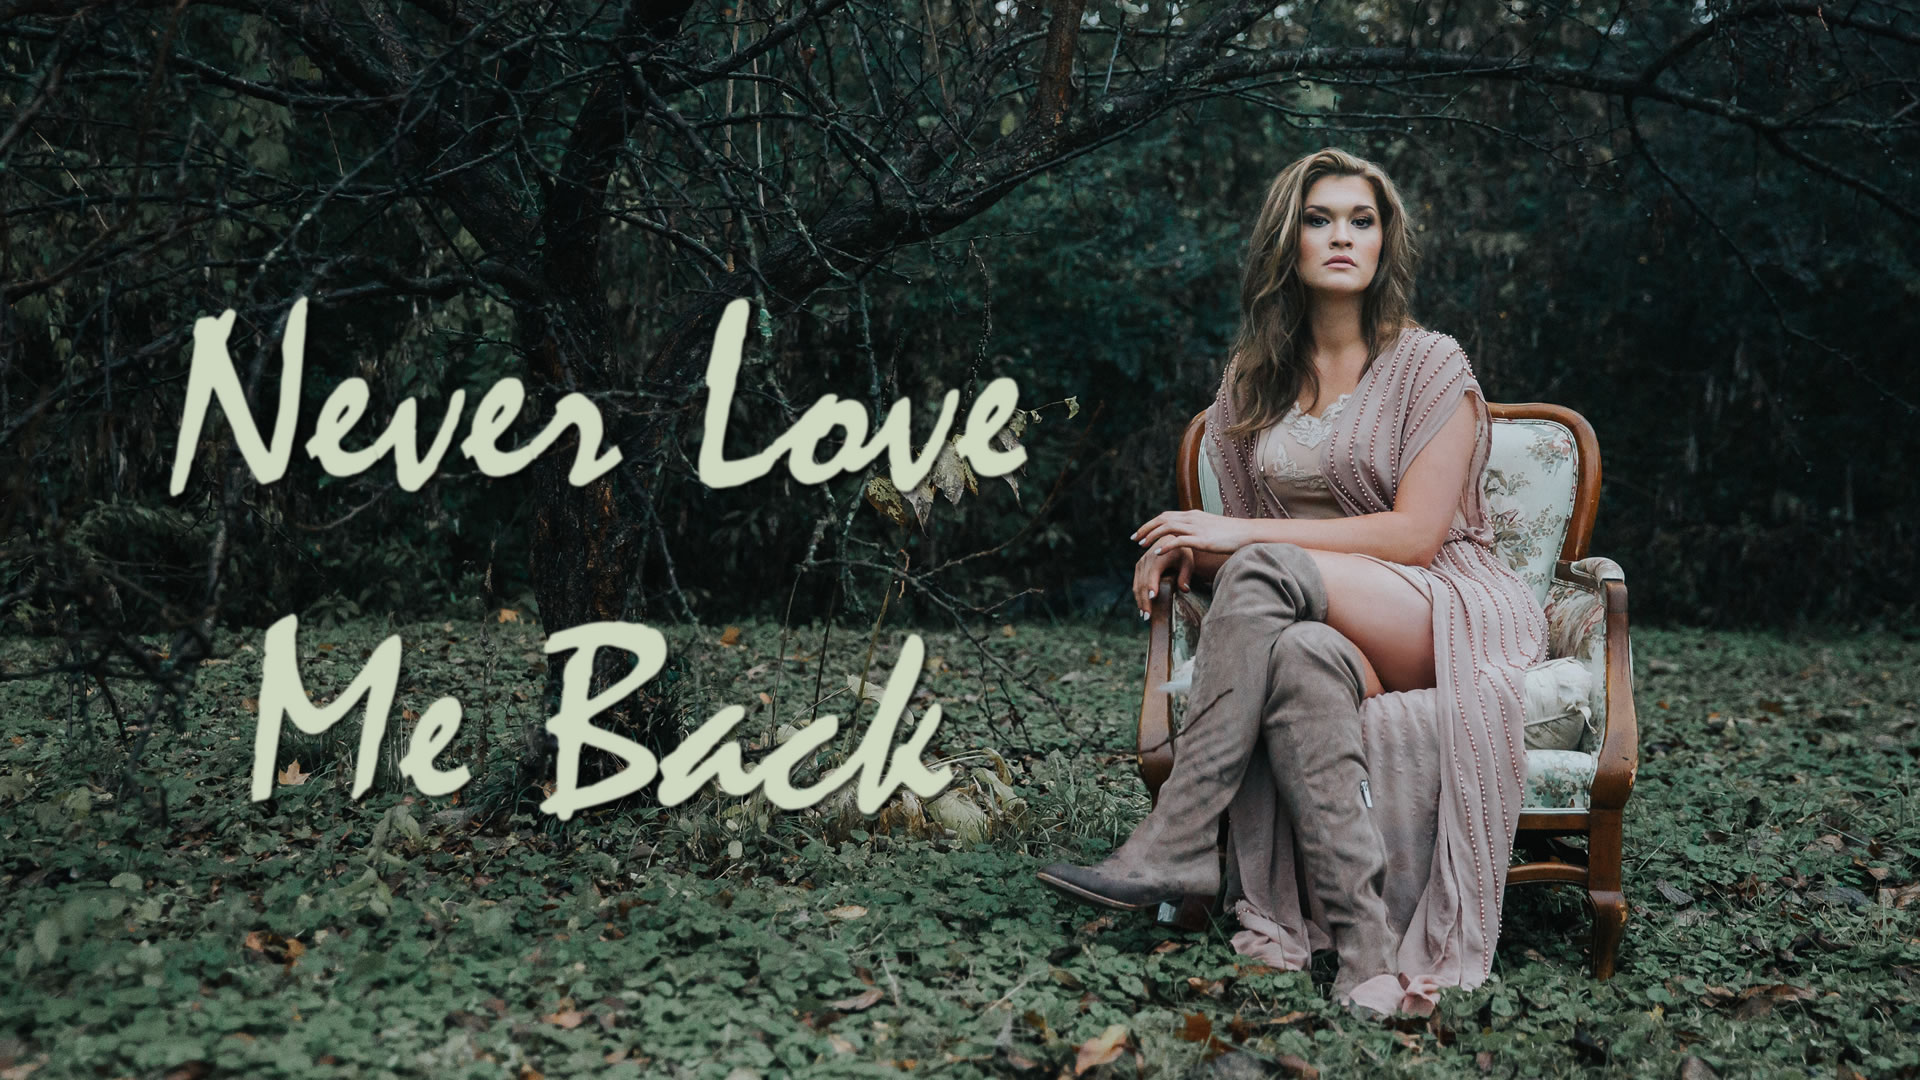 Image from the Never Love Me Back video